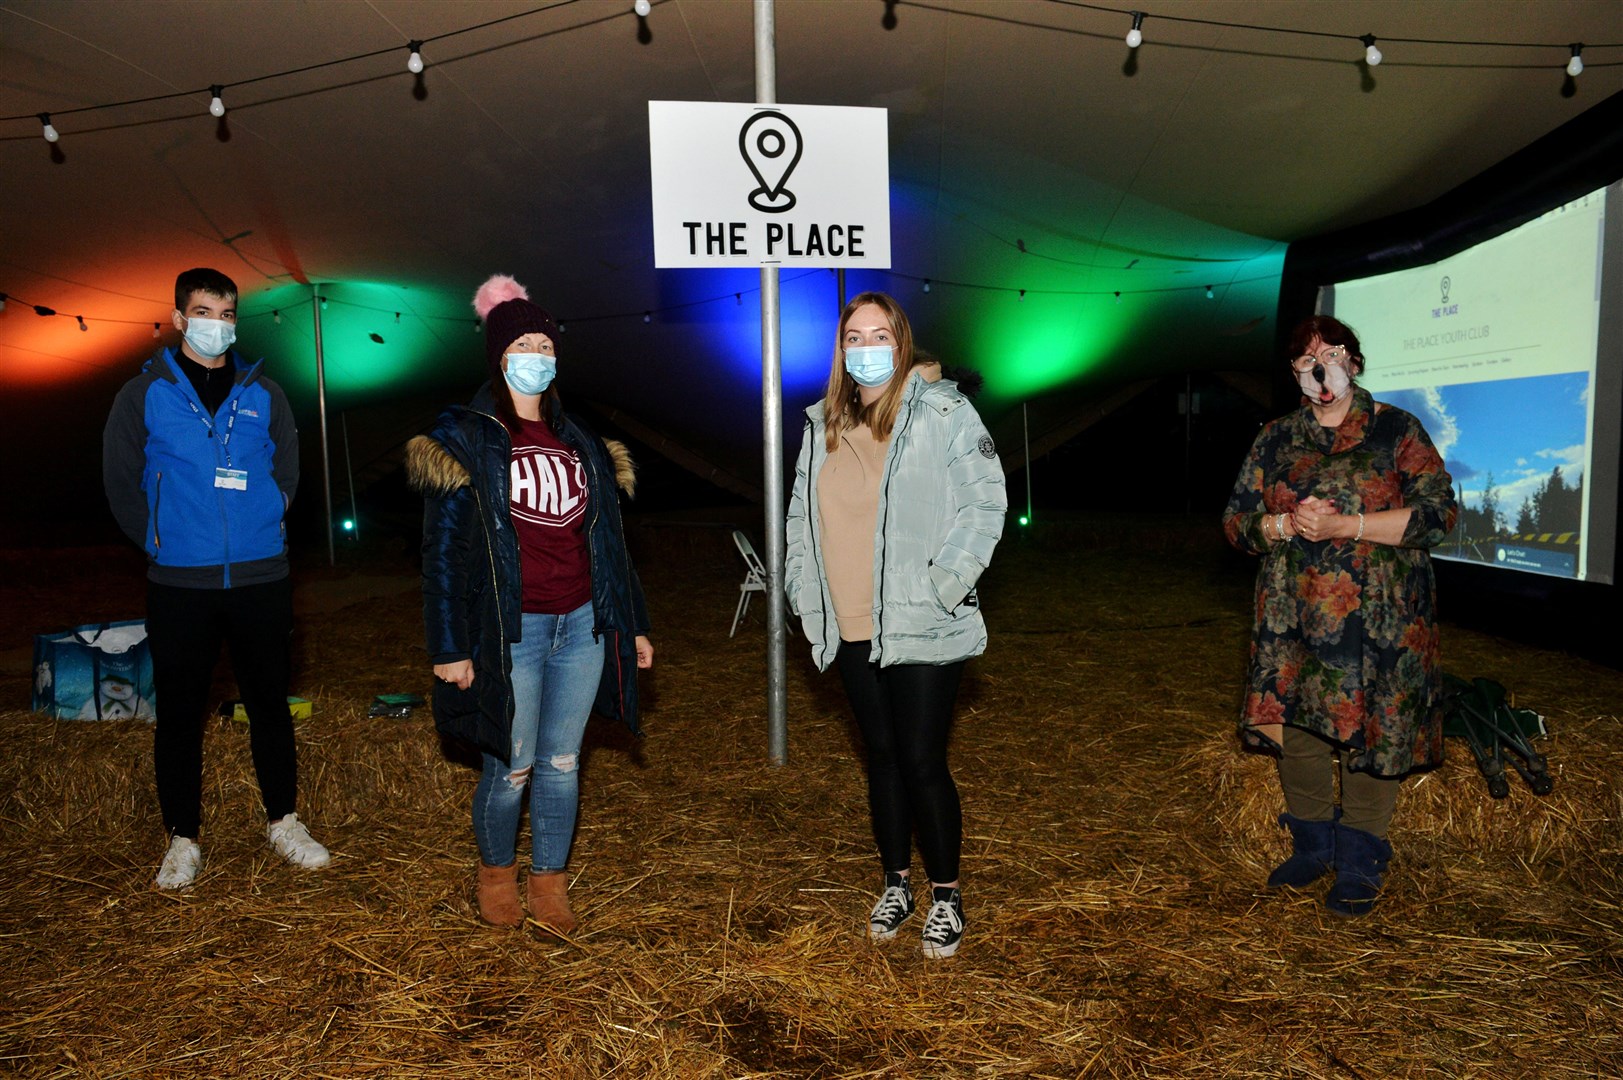 At The Place movie night, Josh Hutchinson, Sharlene Henderson, Anna O'Brien and Janette Douglas are on hand to help out. Picture: Callum Mackay